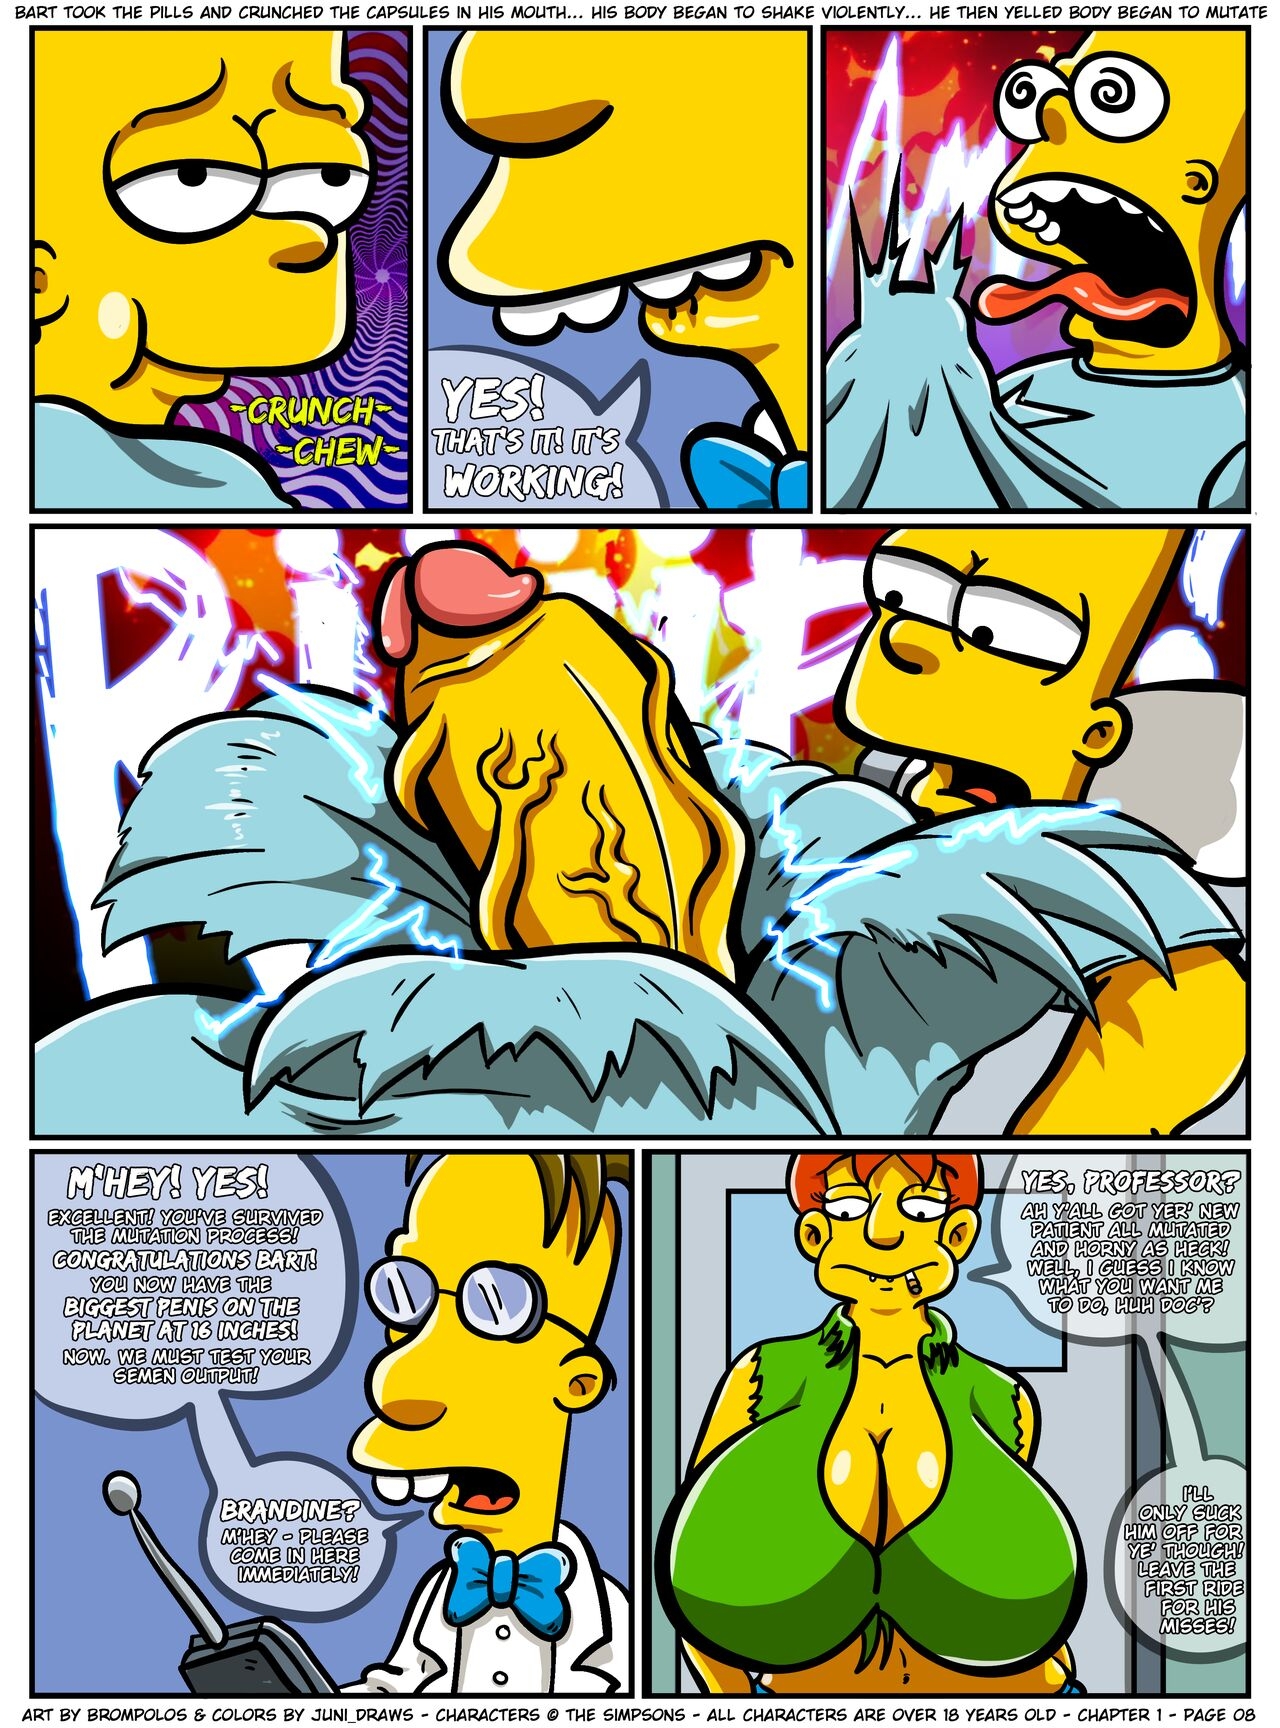 [Brompolos/Juni_Draws] The Sexensteins (Simpsons) [Ongoing] 8